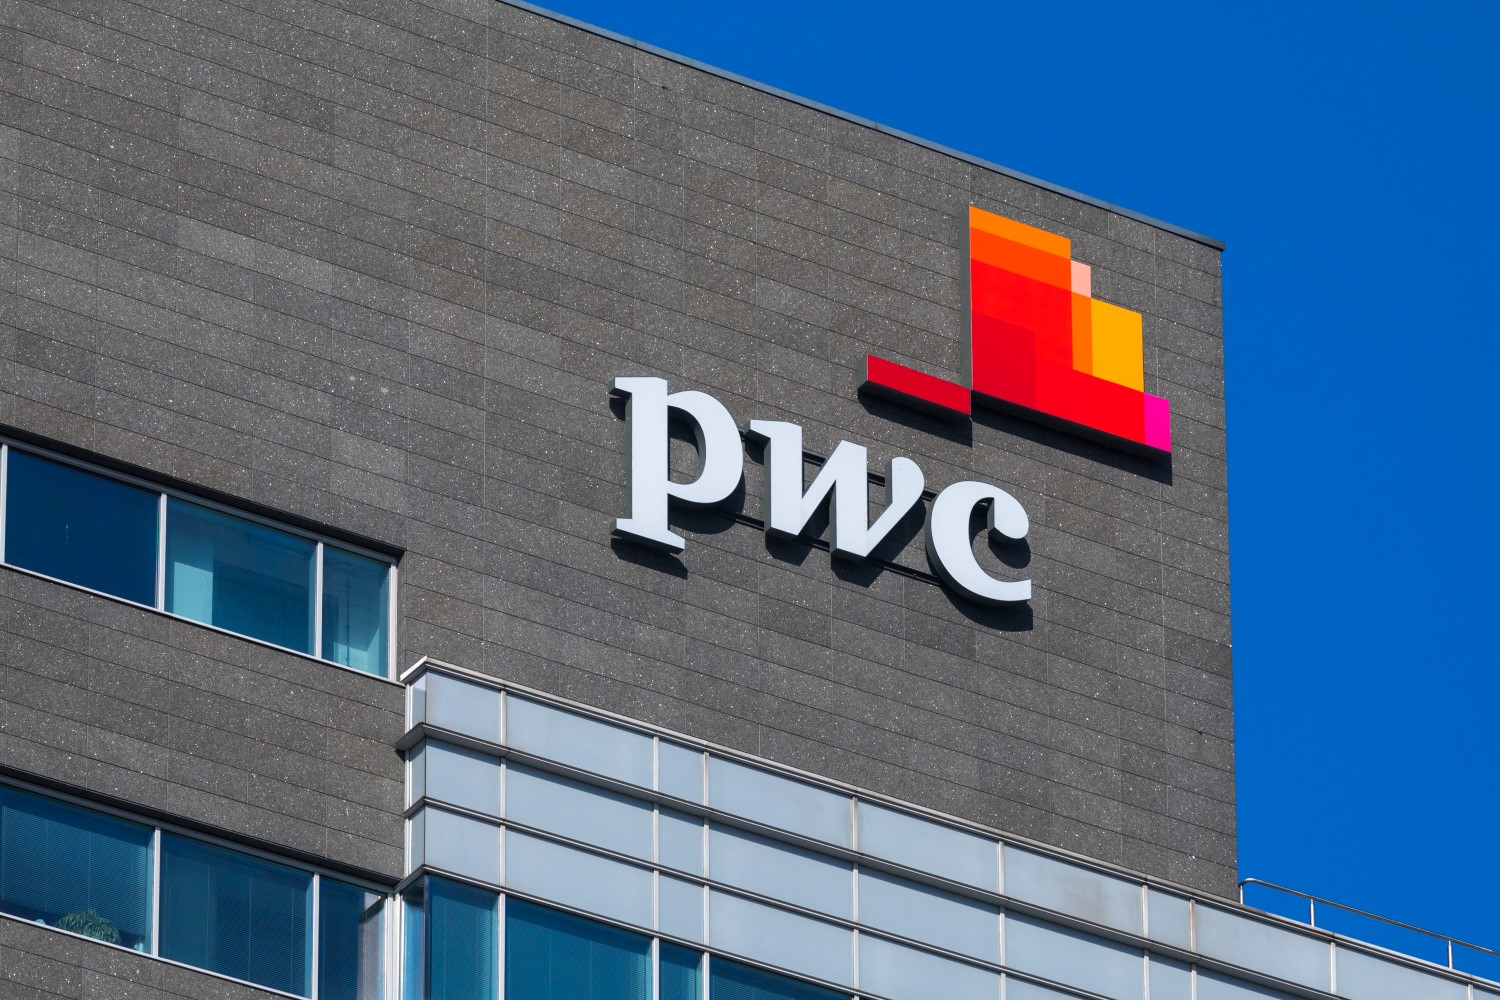 Crypto Exchange WEX Linked To Iranian Ransomware Operators, Says PwC